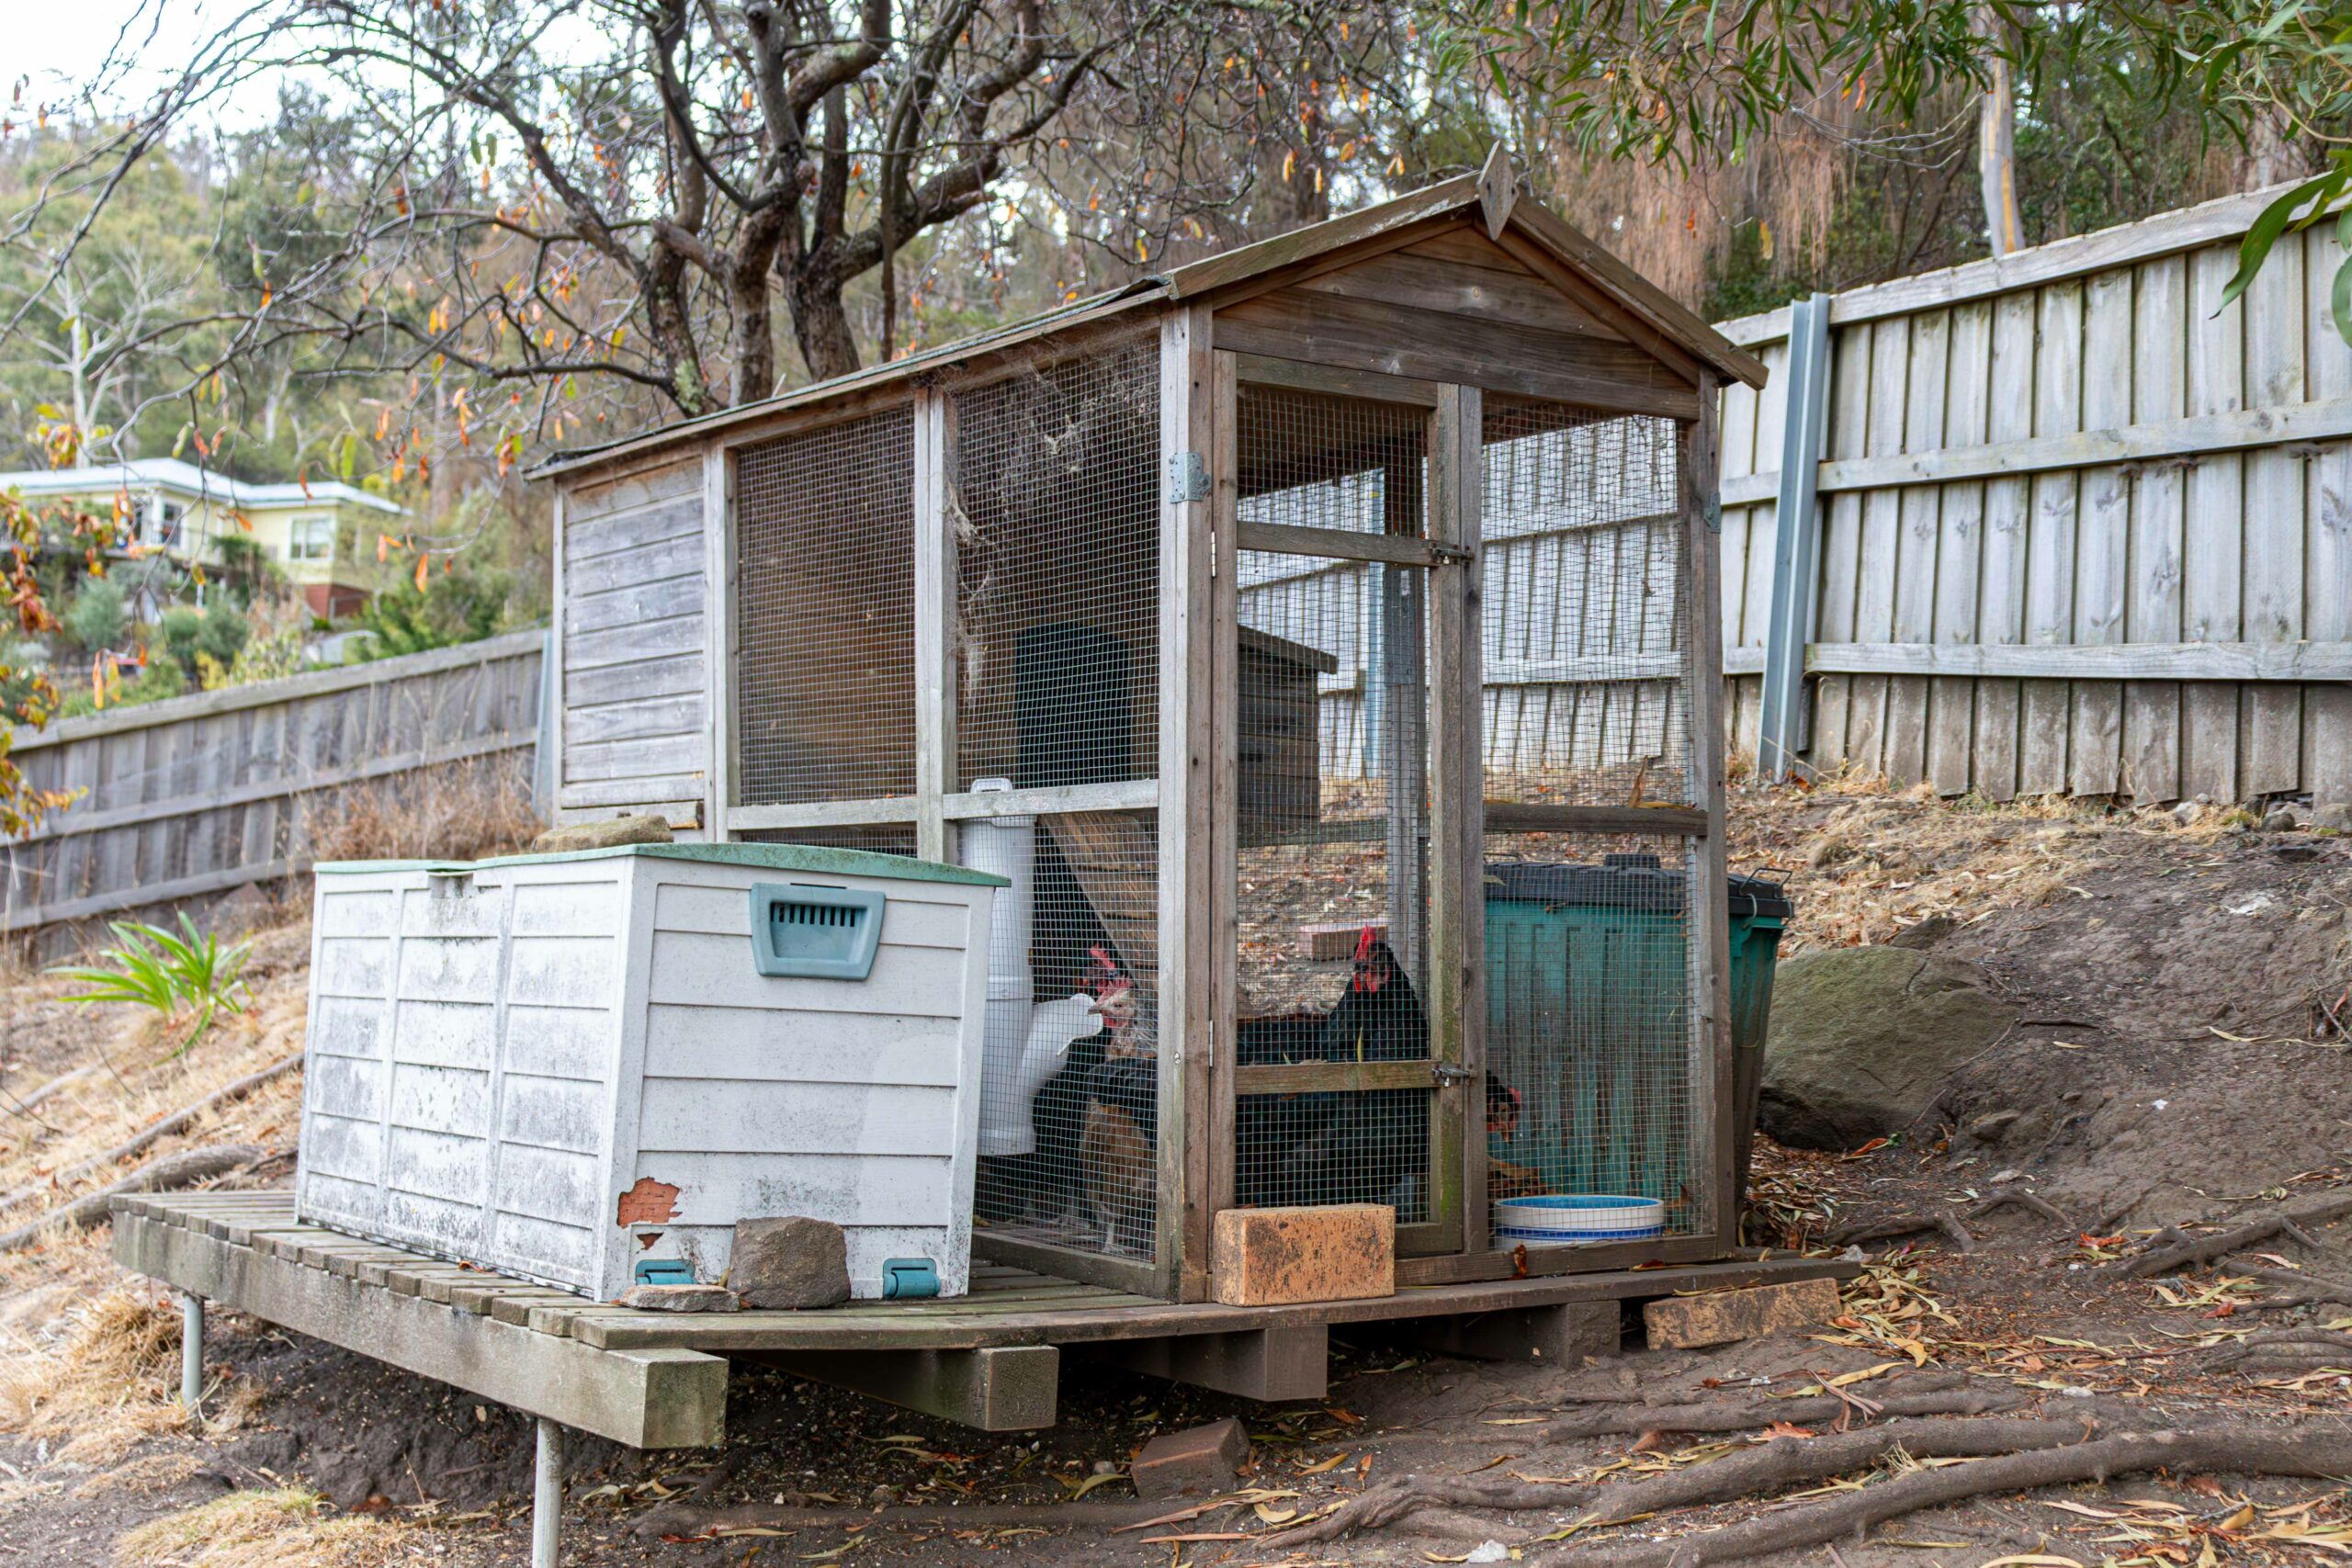 An old wooden chicken house with a green roof. A grey trunk can be seen on the left side and a green bin in the right. A black chicken is inside the chicken house.